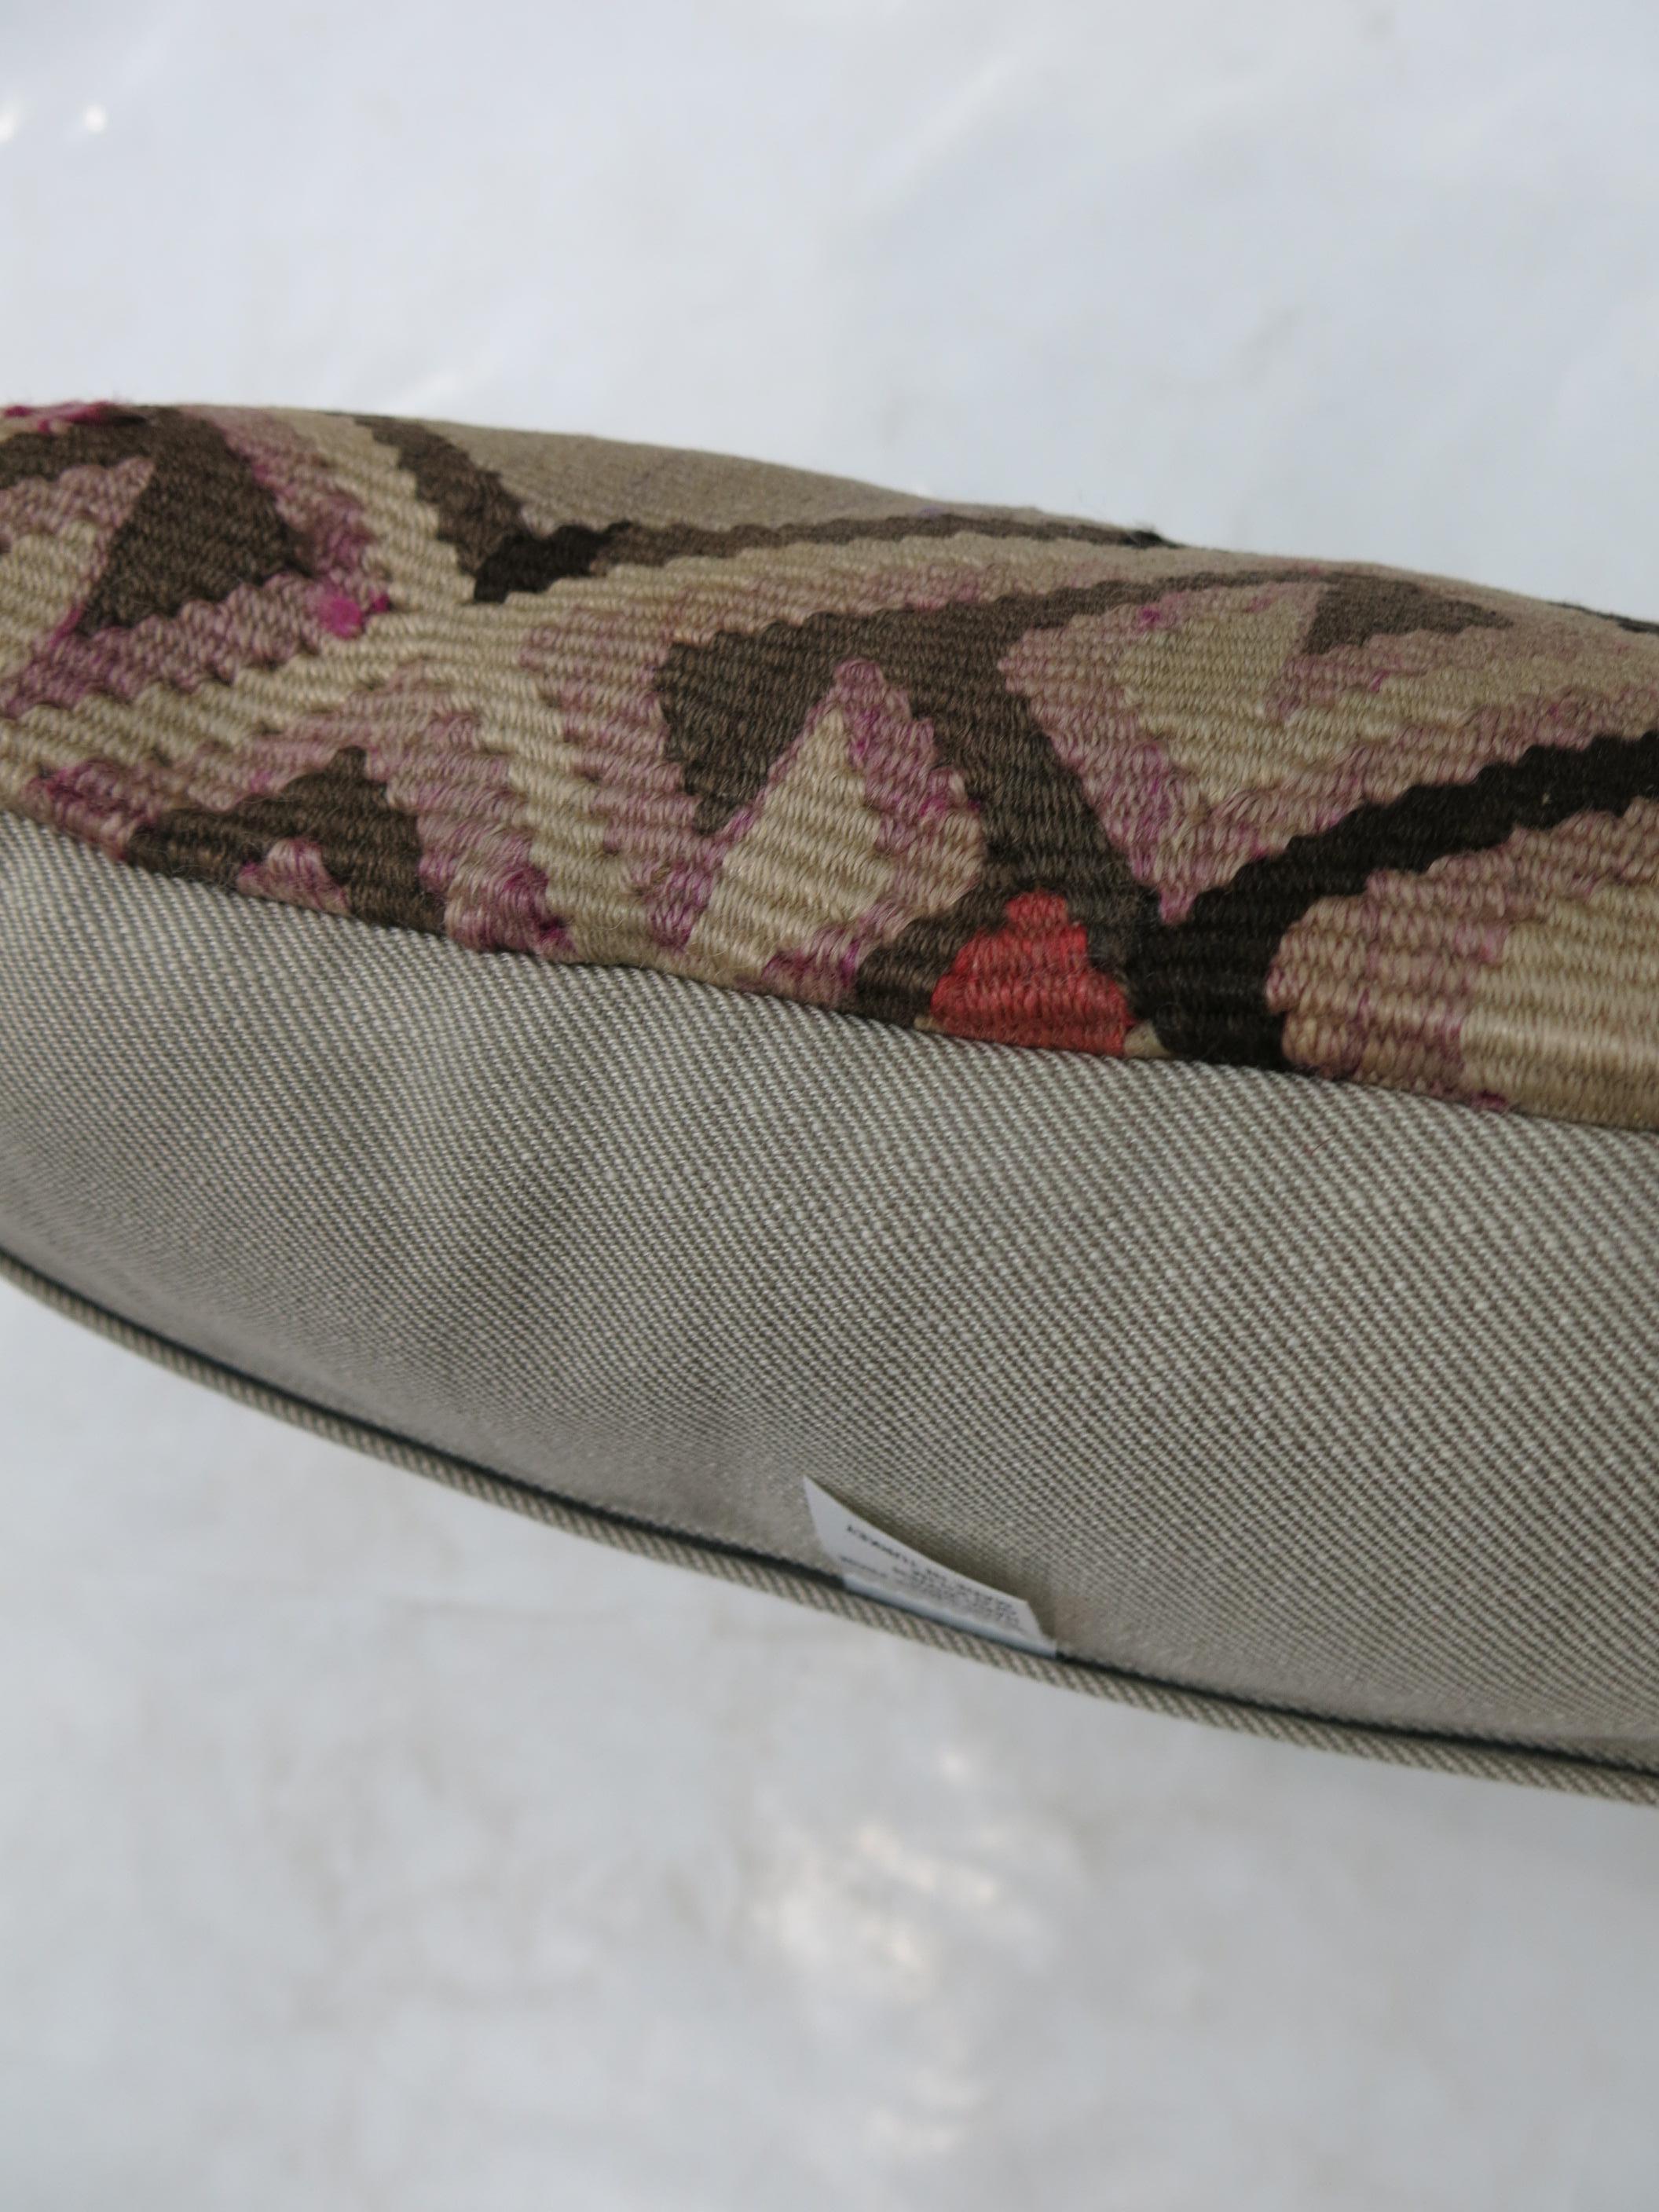 Pillow made from a vintage Turkish Kilim flat-weave.